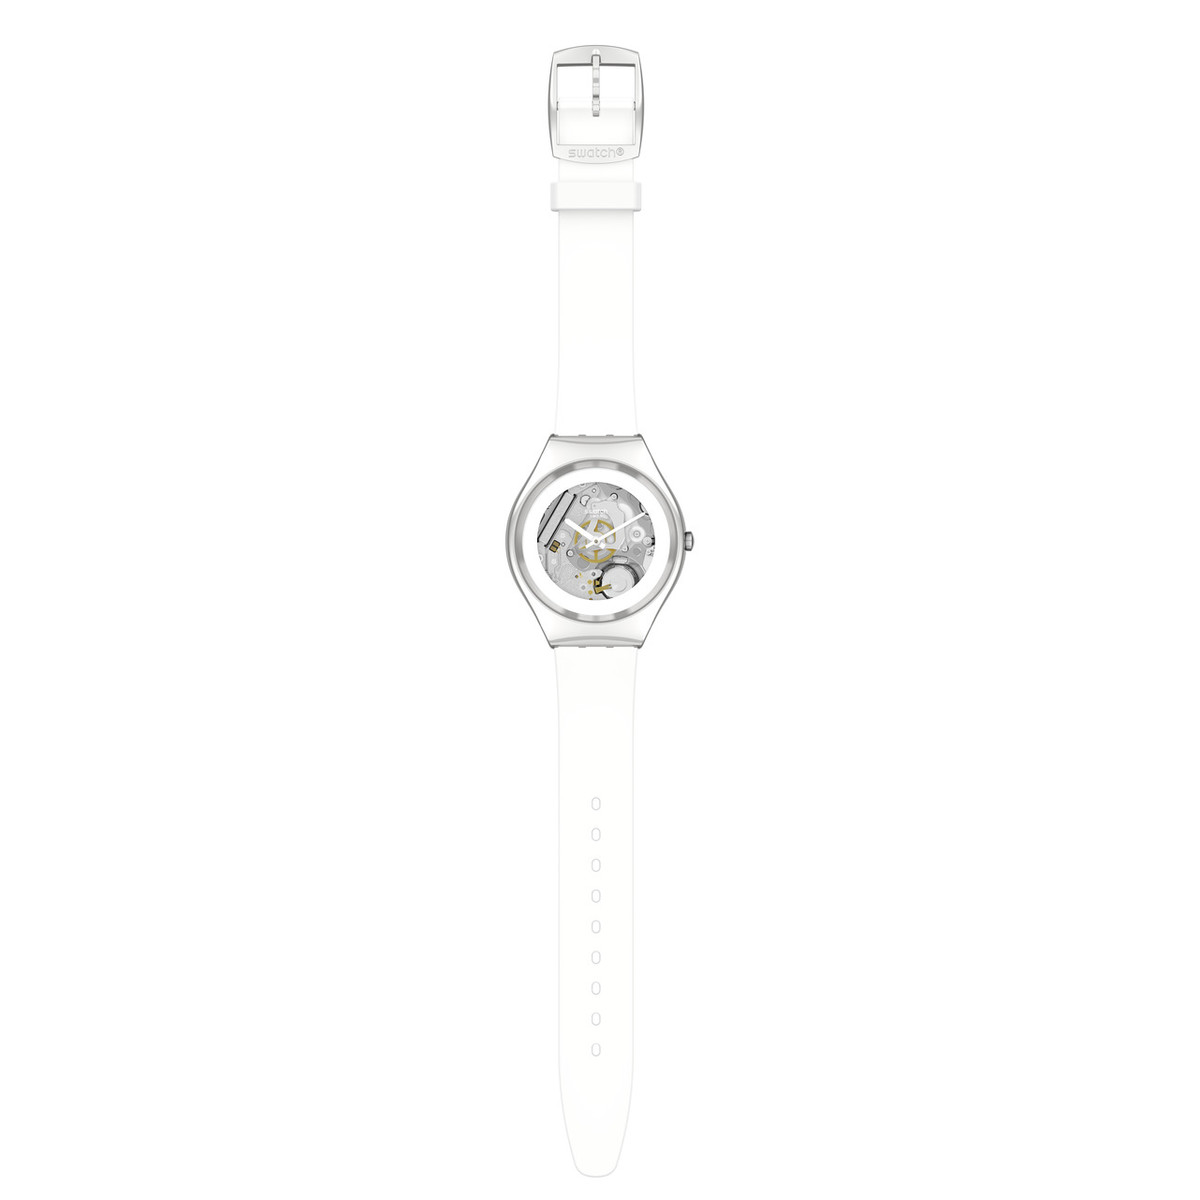 Montre SWATCH Skin irony Pure white irony homme bracelet silicone blanc - vue D1